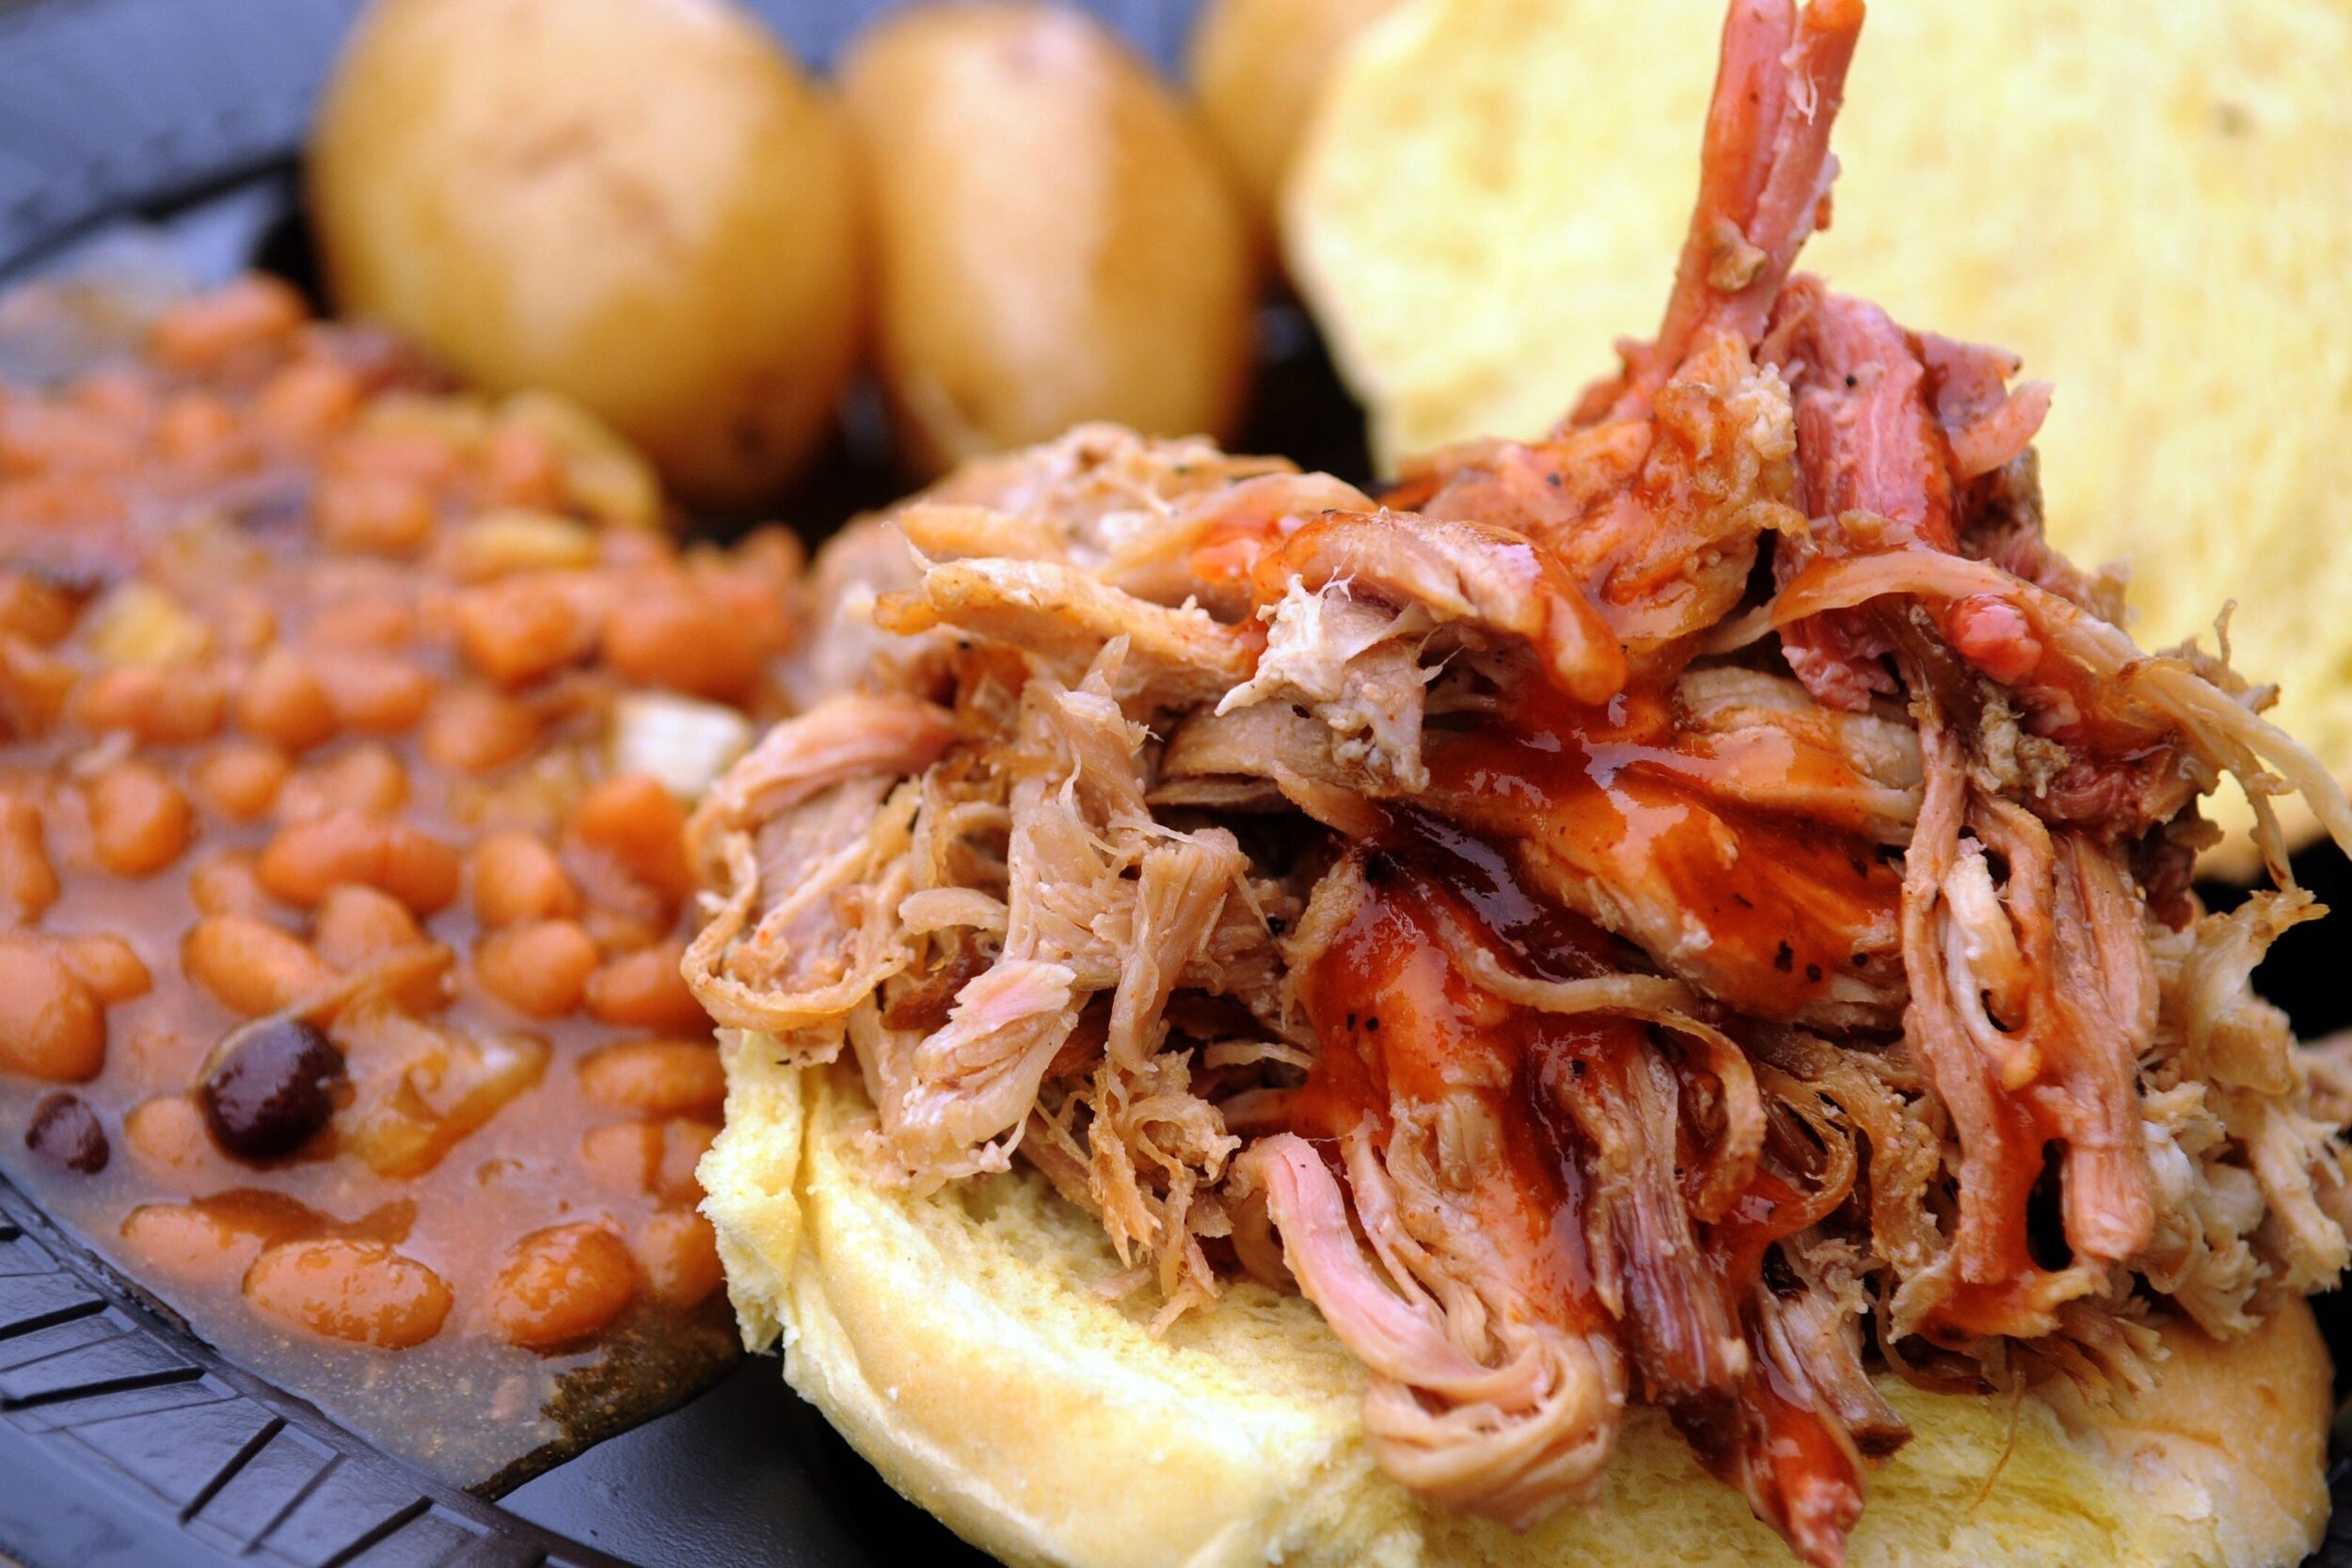  Photo:  Nice looking pulled-pork sandwich with beans and potatoes in the background.  